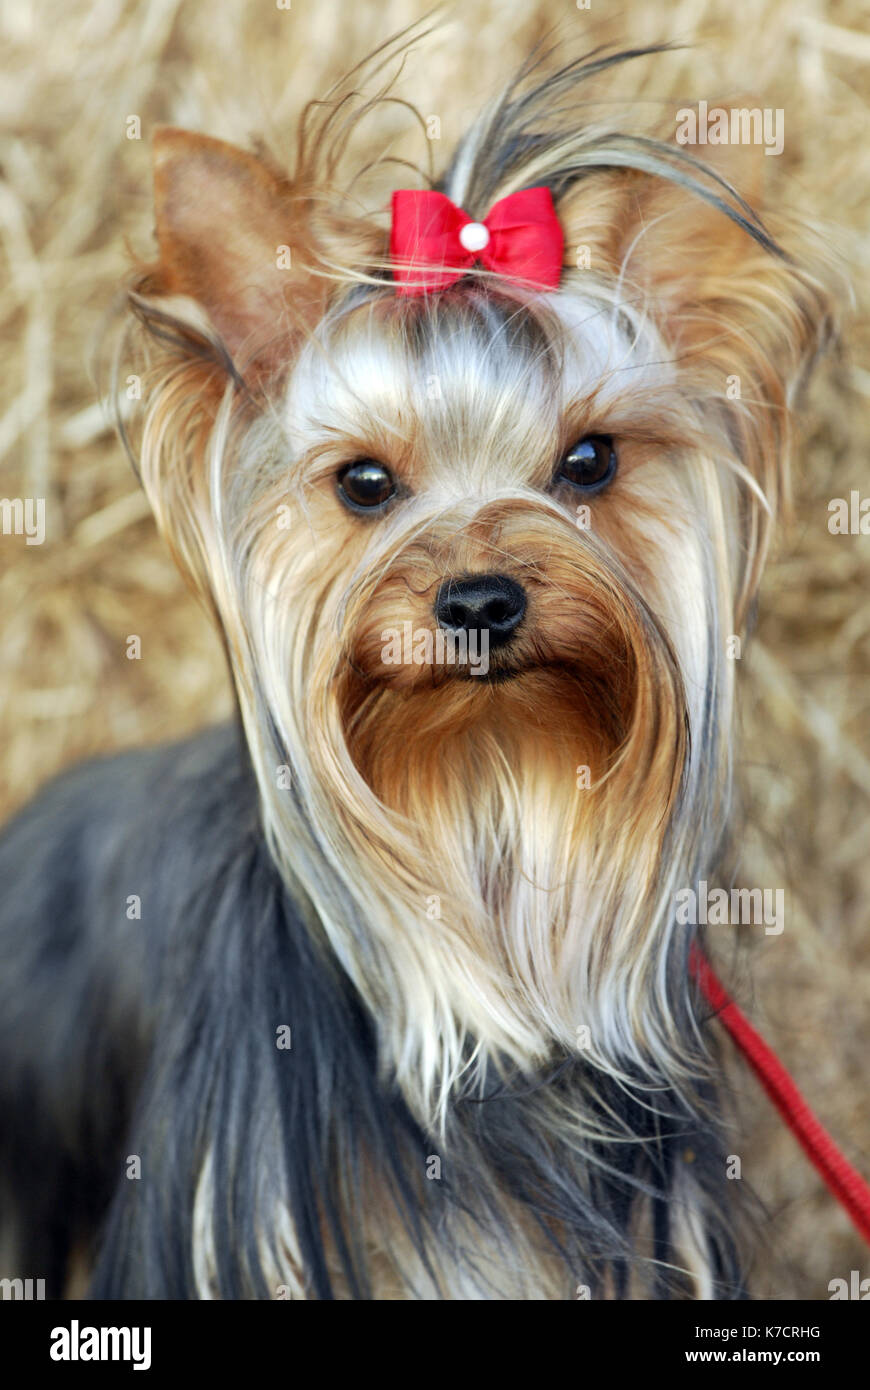 A Yorkshire Terrier With A Red Bow Of Ribbon In Its Hair Of Fur Yorky K7CRHG 